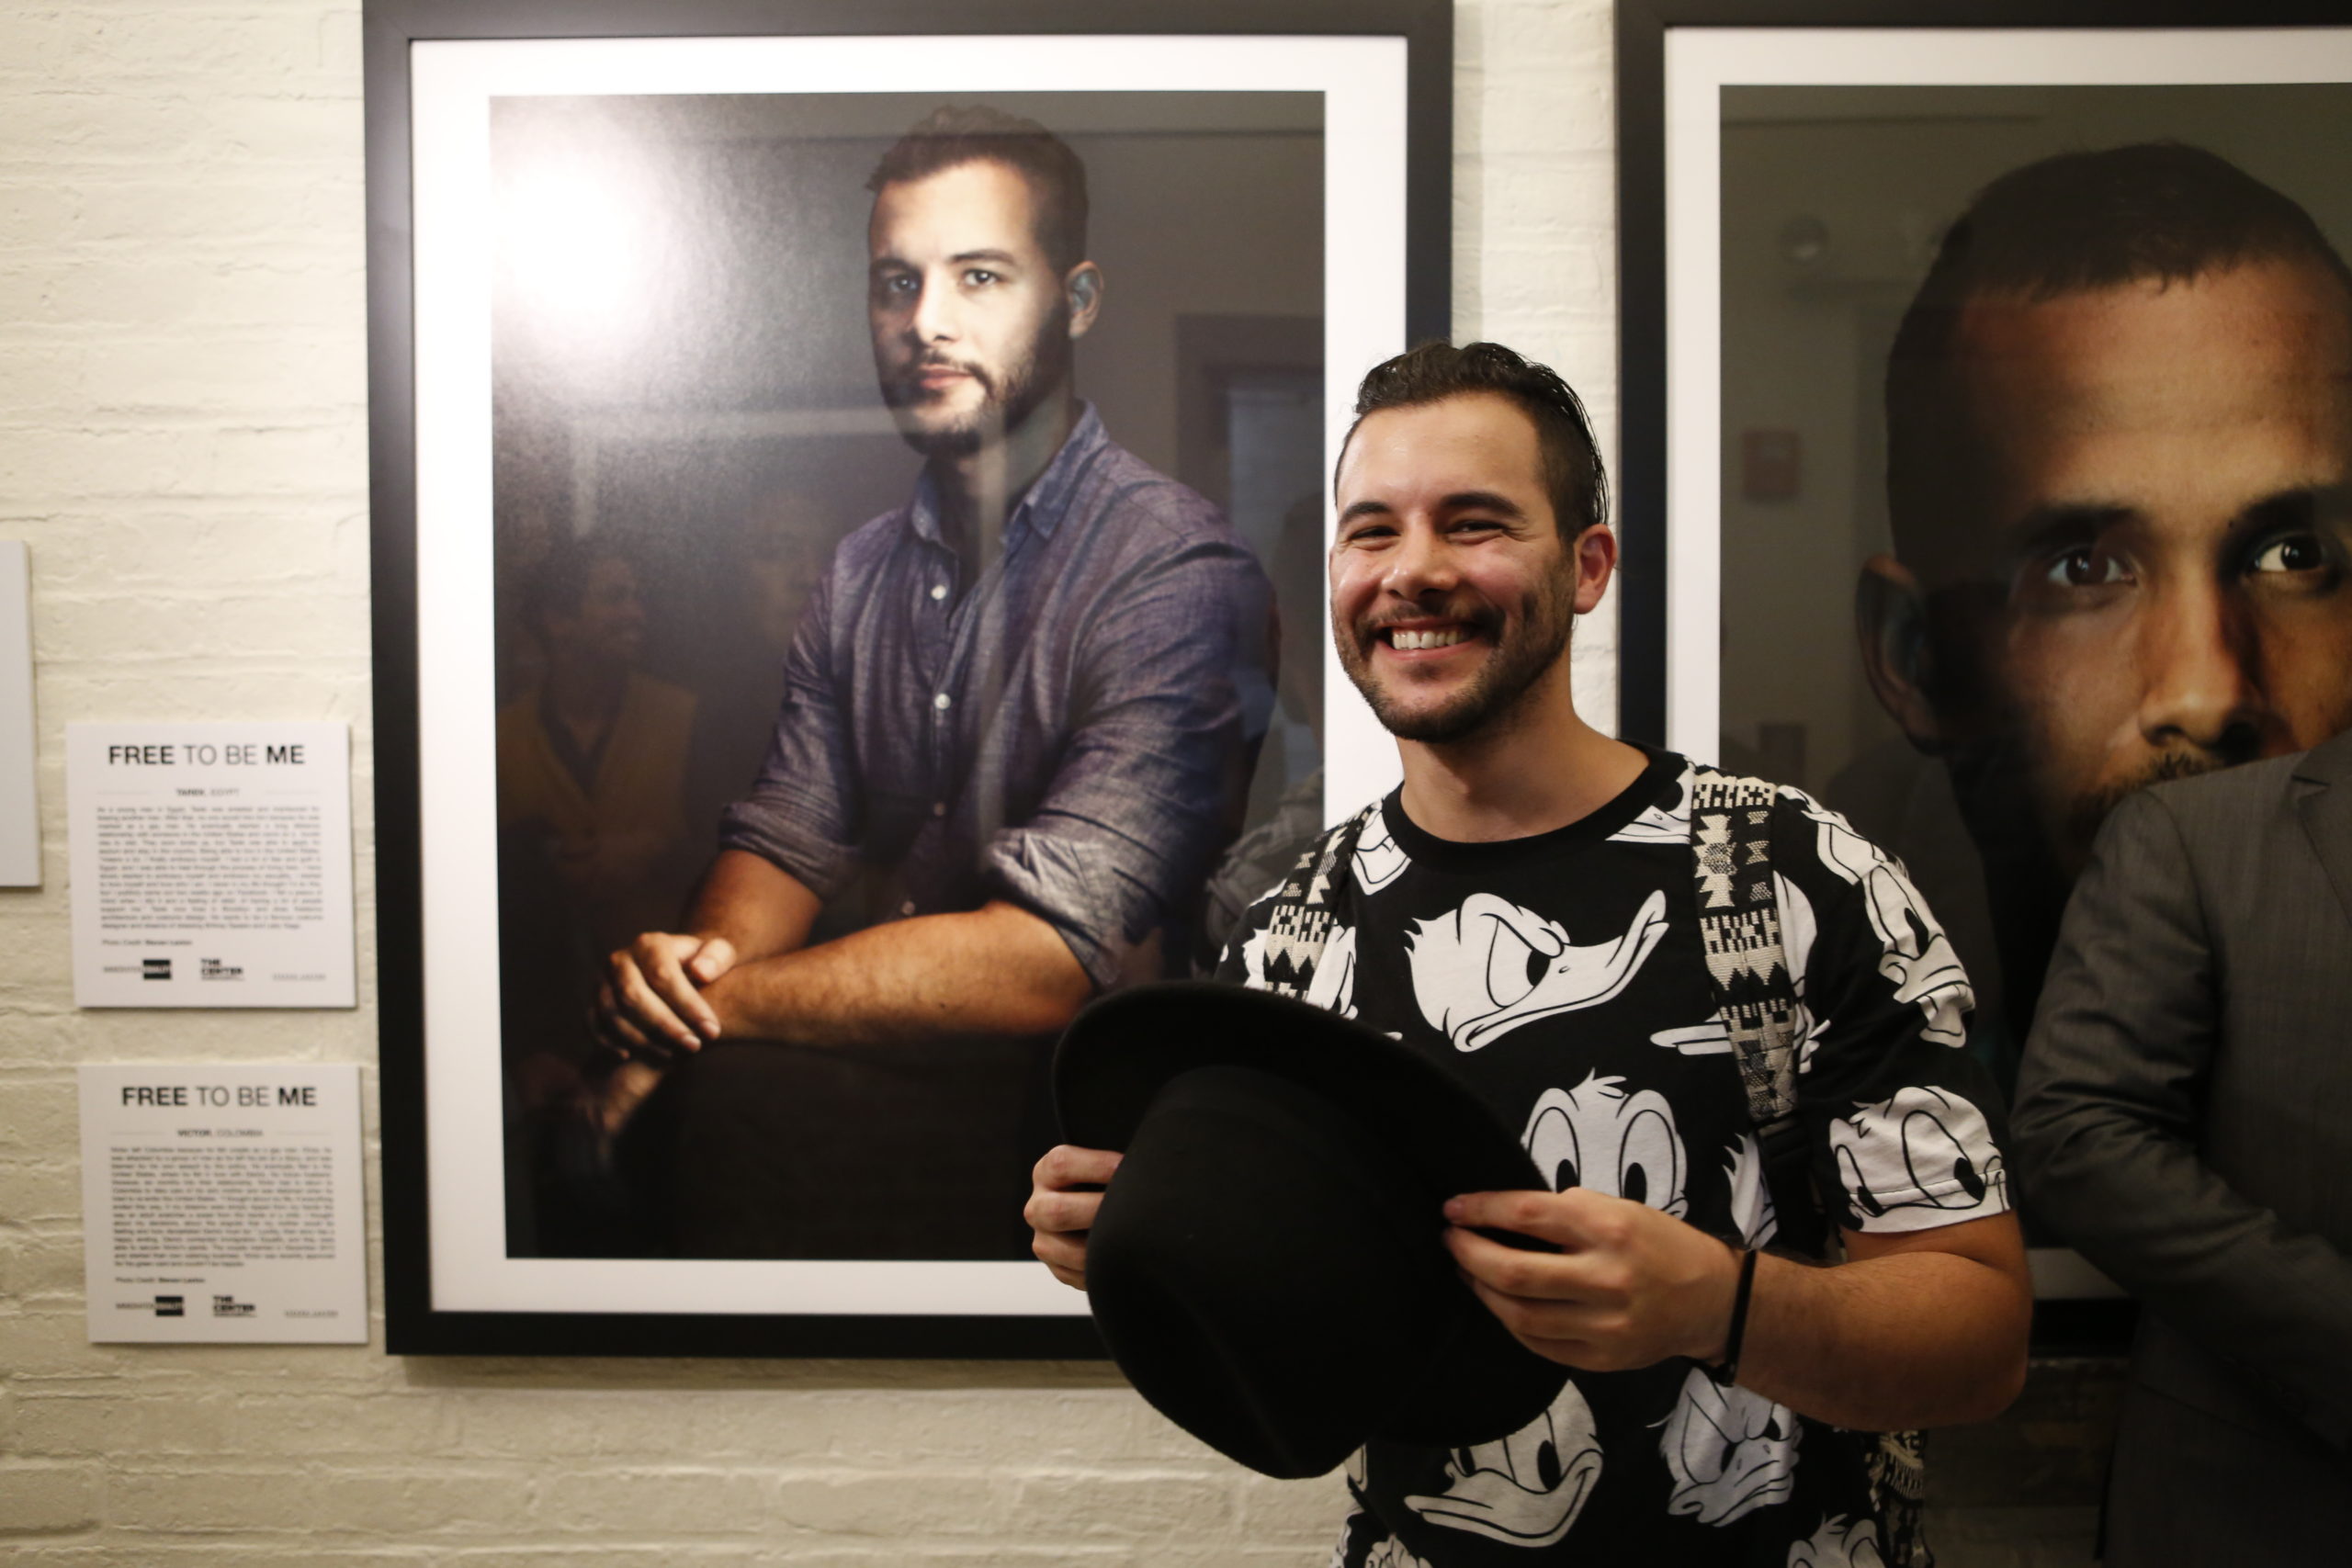 Tarek smiling in front of a large portrait photograph, whilst holding his hat